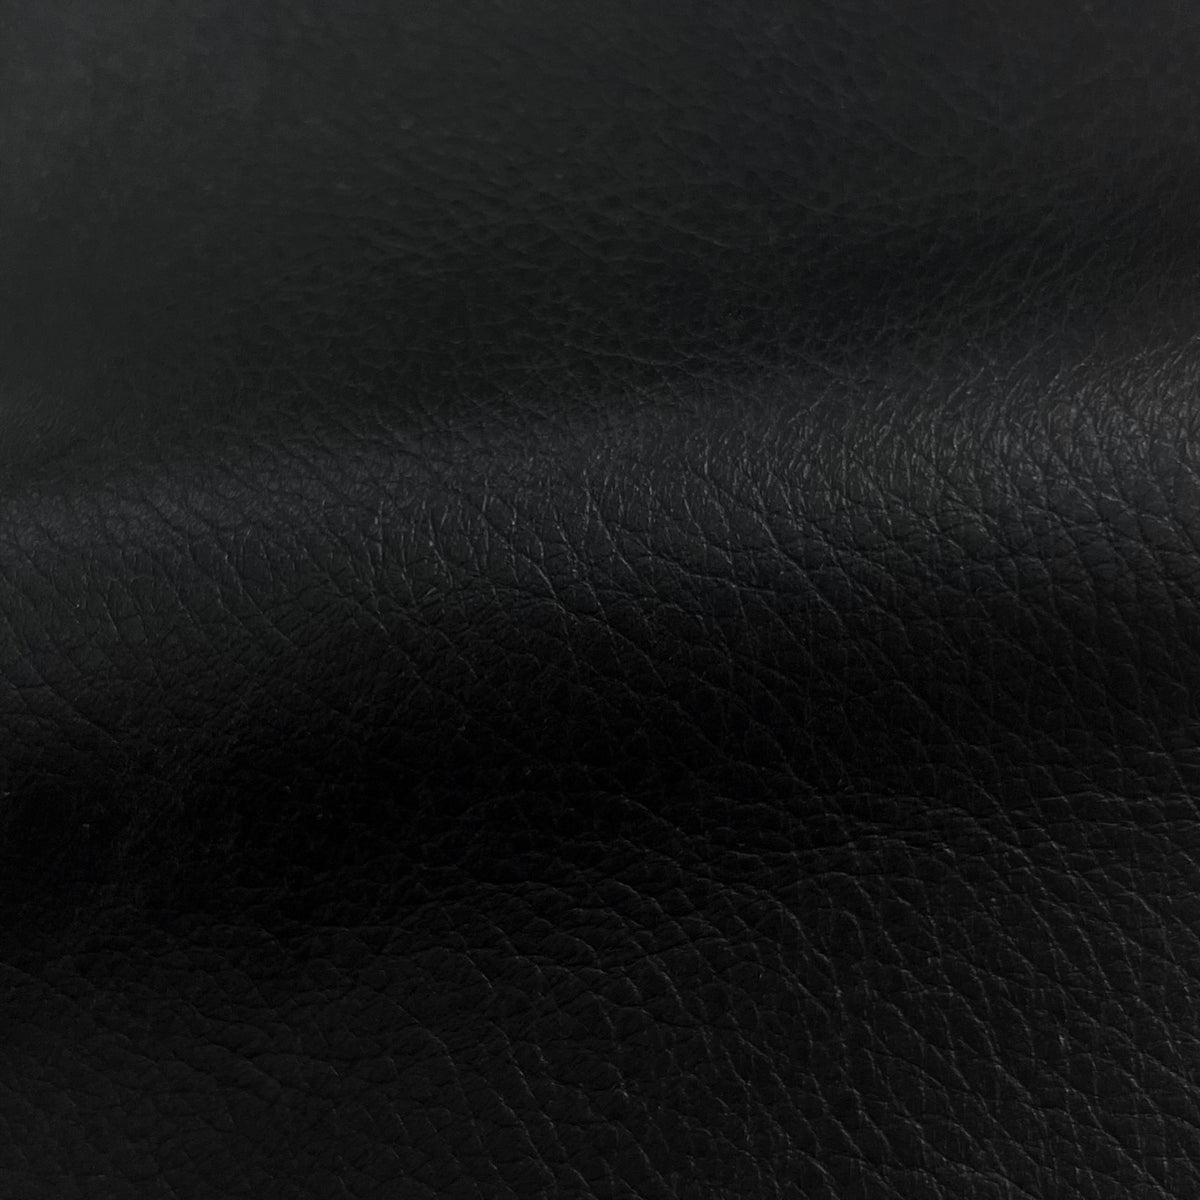 Victory Upholstery Cow Leather